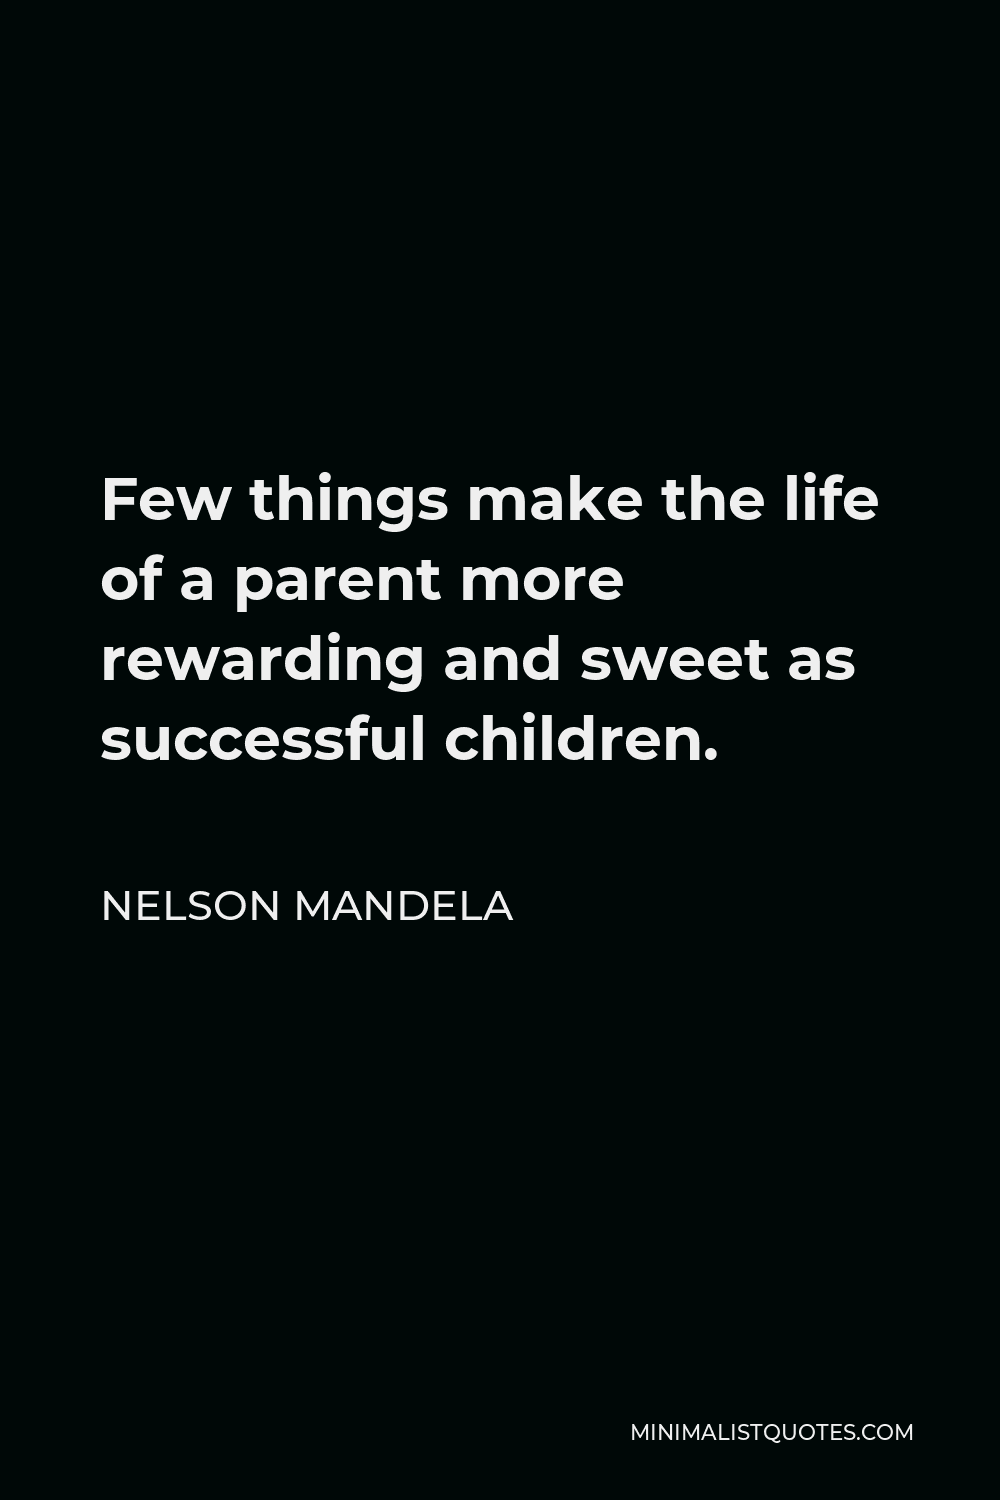 Nelson Mandela Quote - Few things make the life of a parent more rewarding and sweet as successful children.